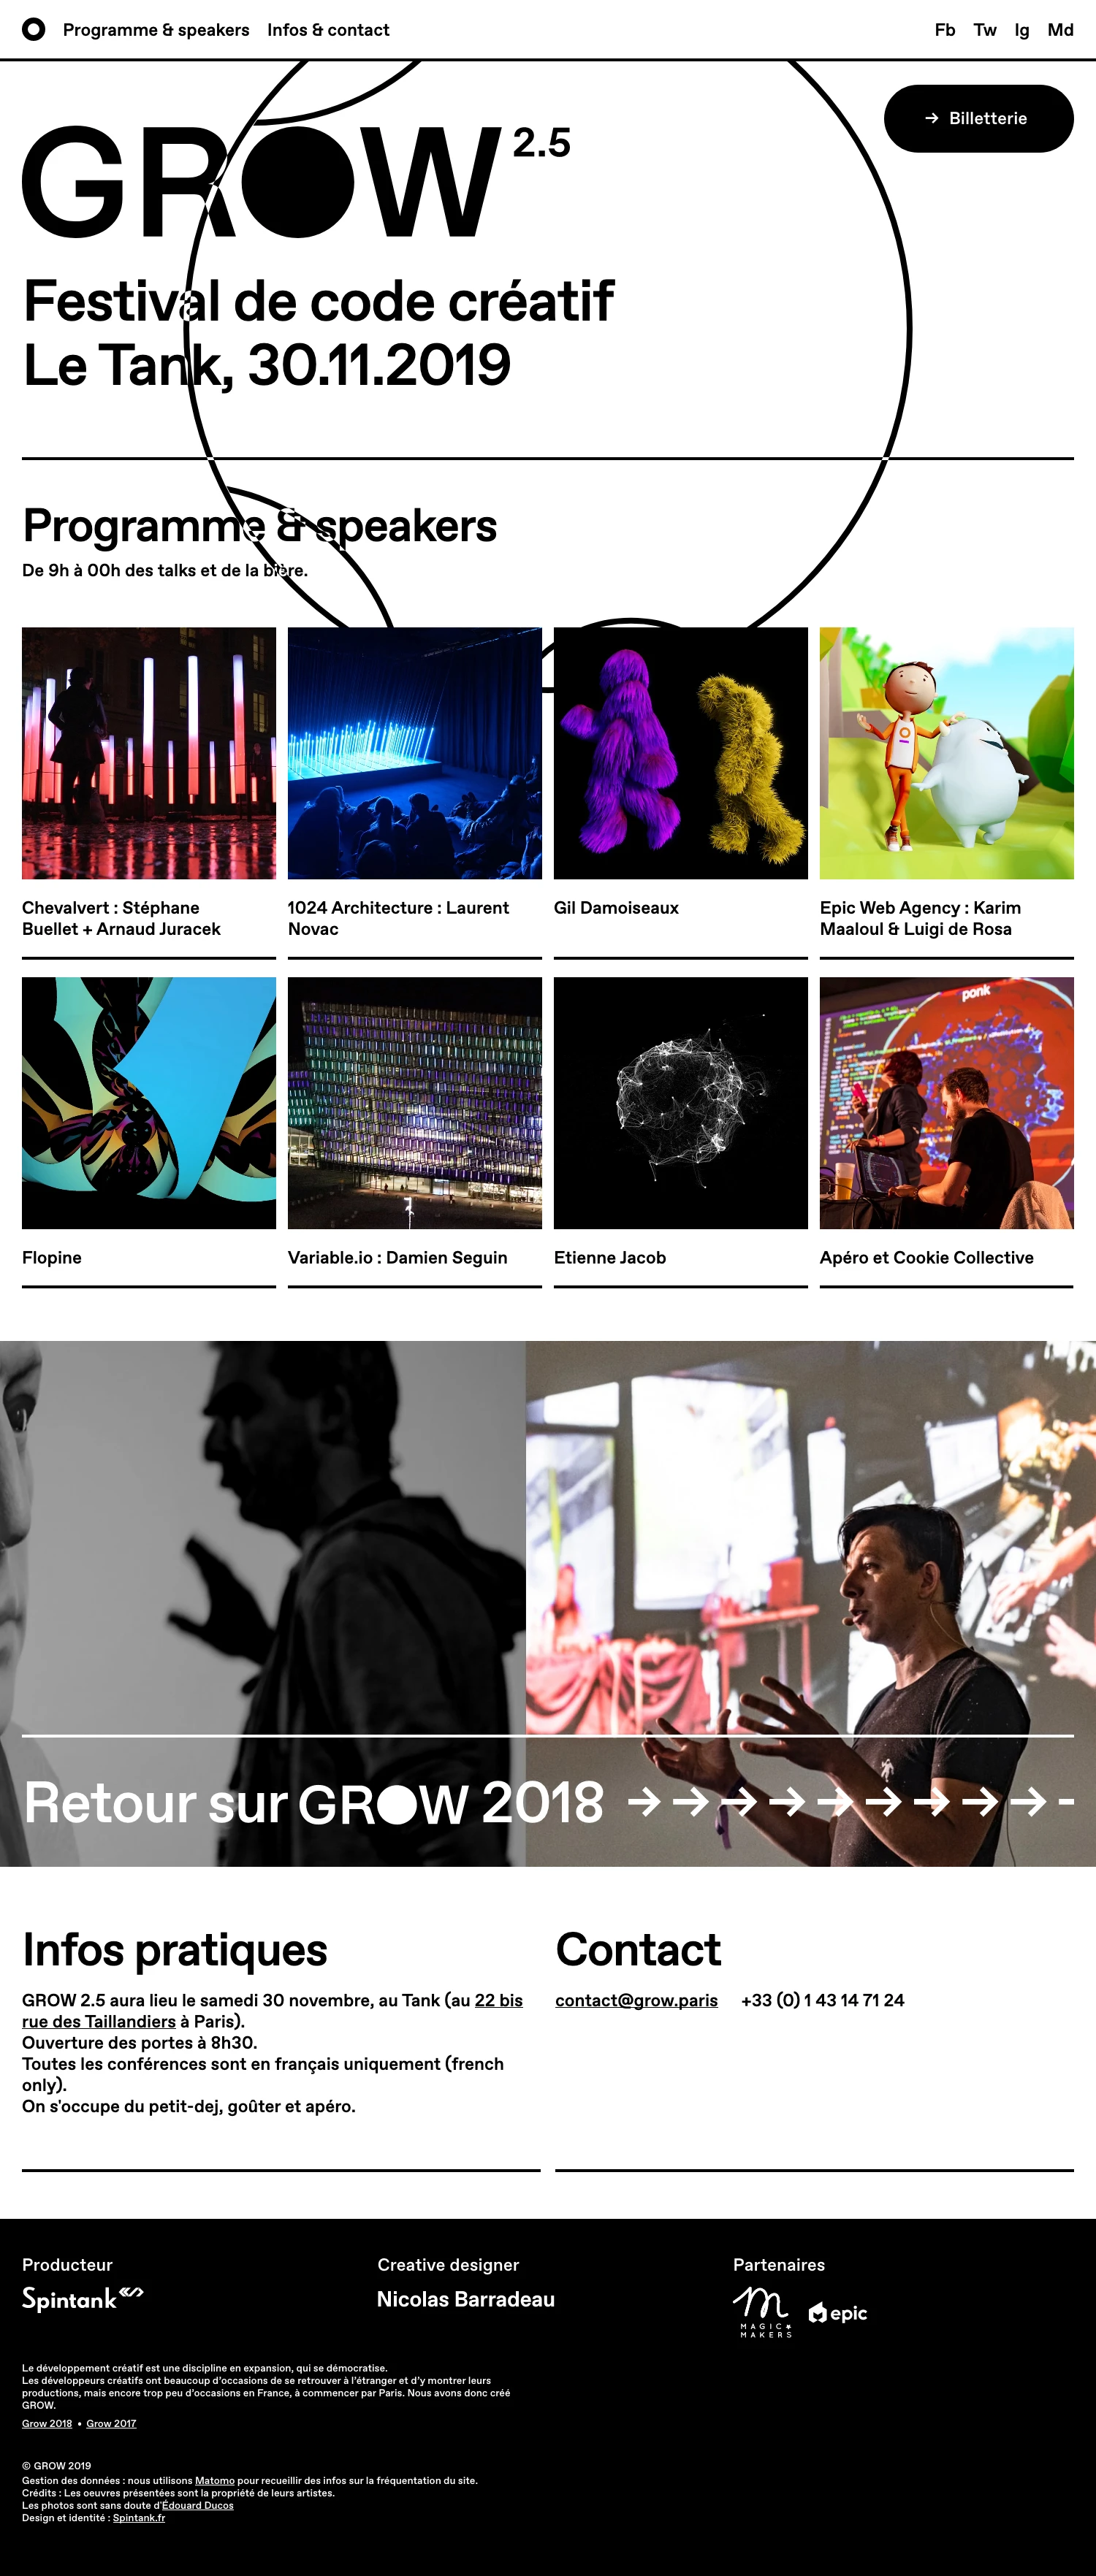 GROW Paris 2.5 Landing Page Example: GROW 2.5 will be held on november 30th at @letankparis